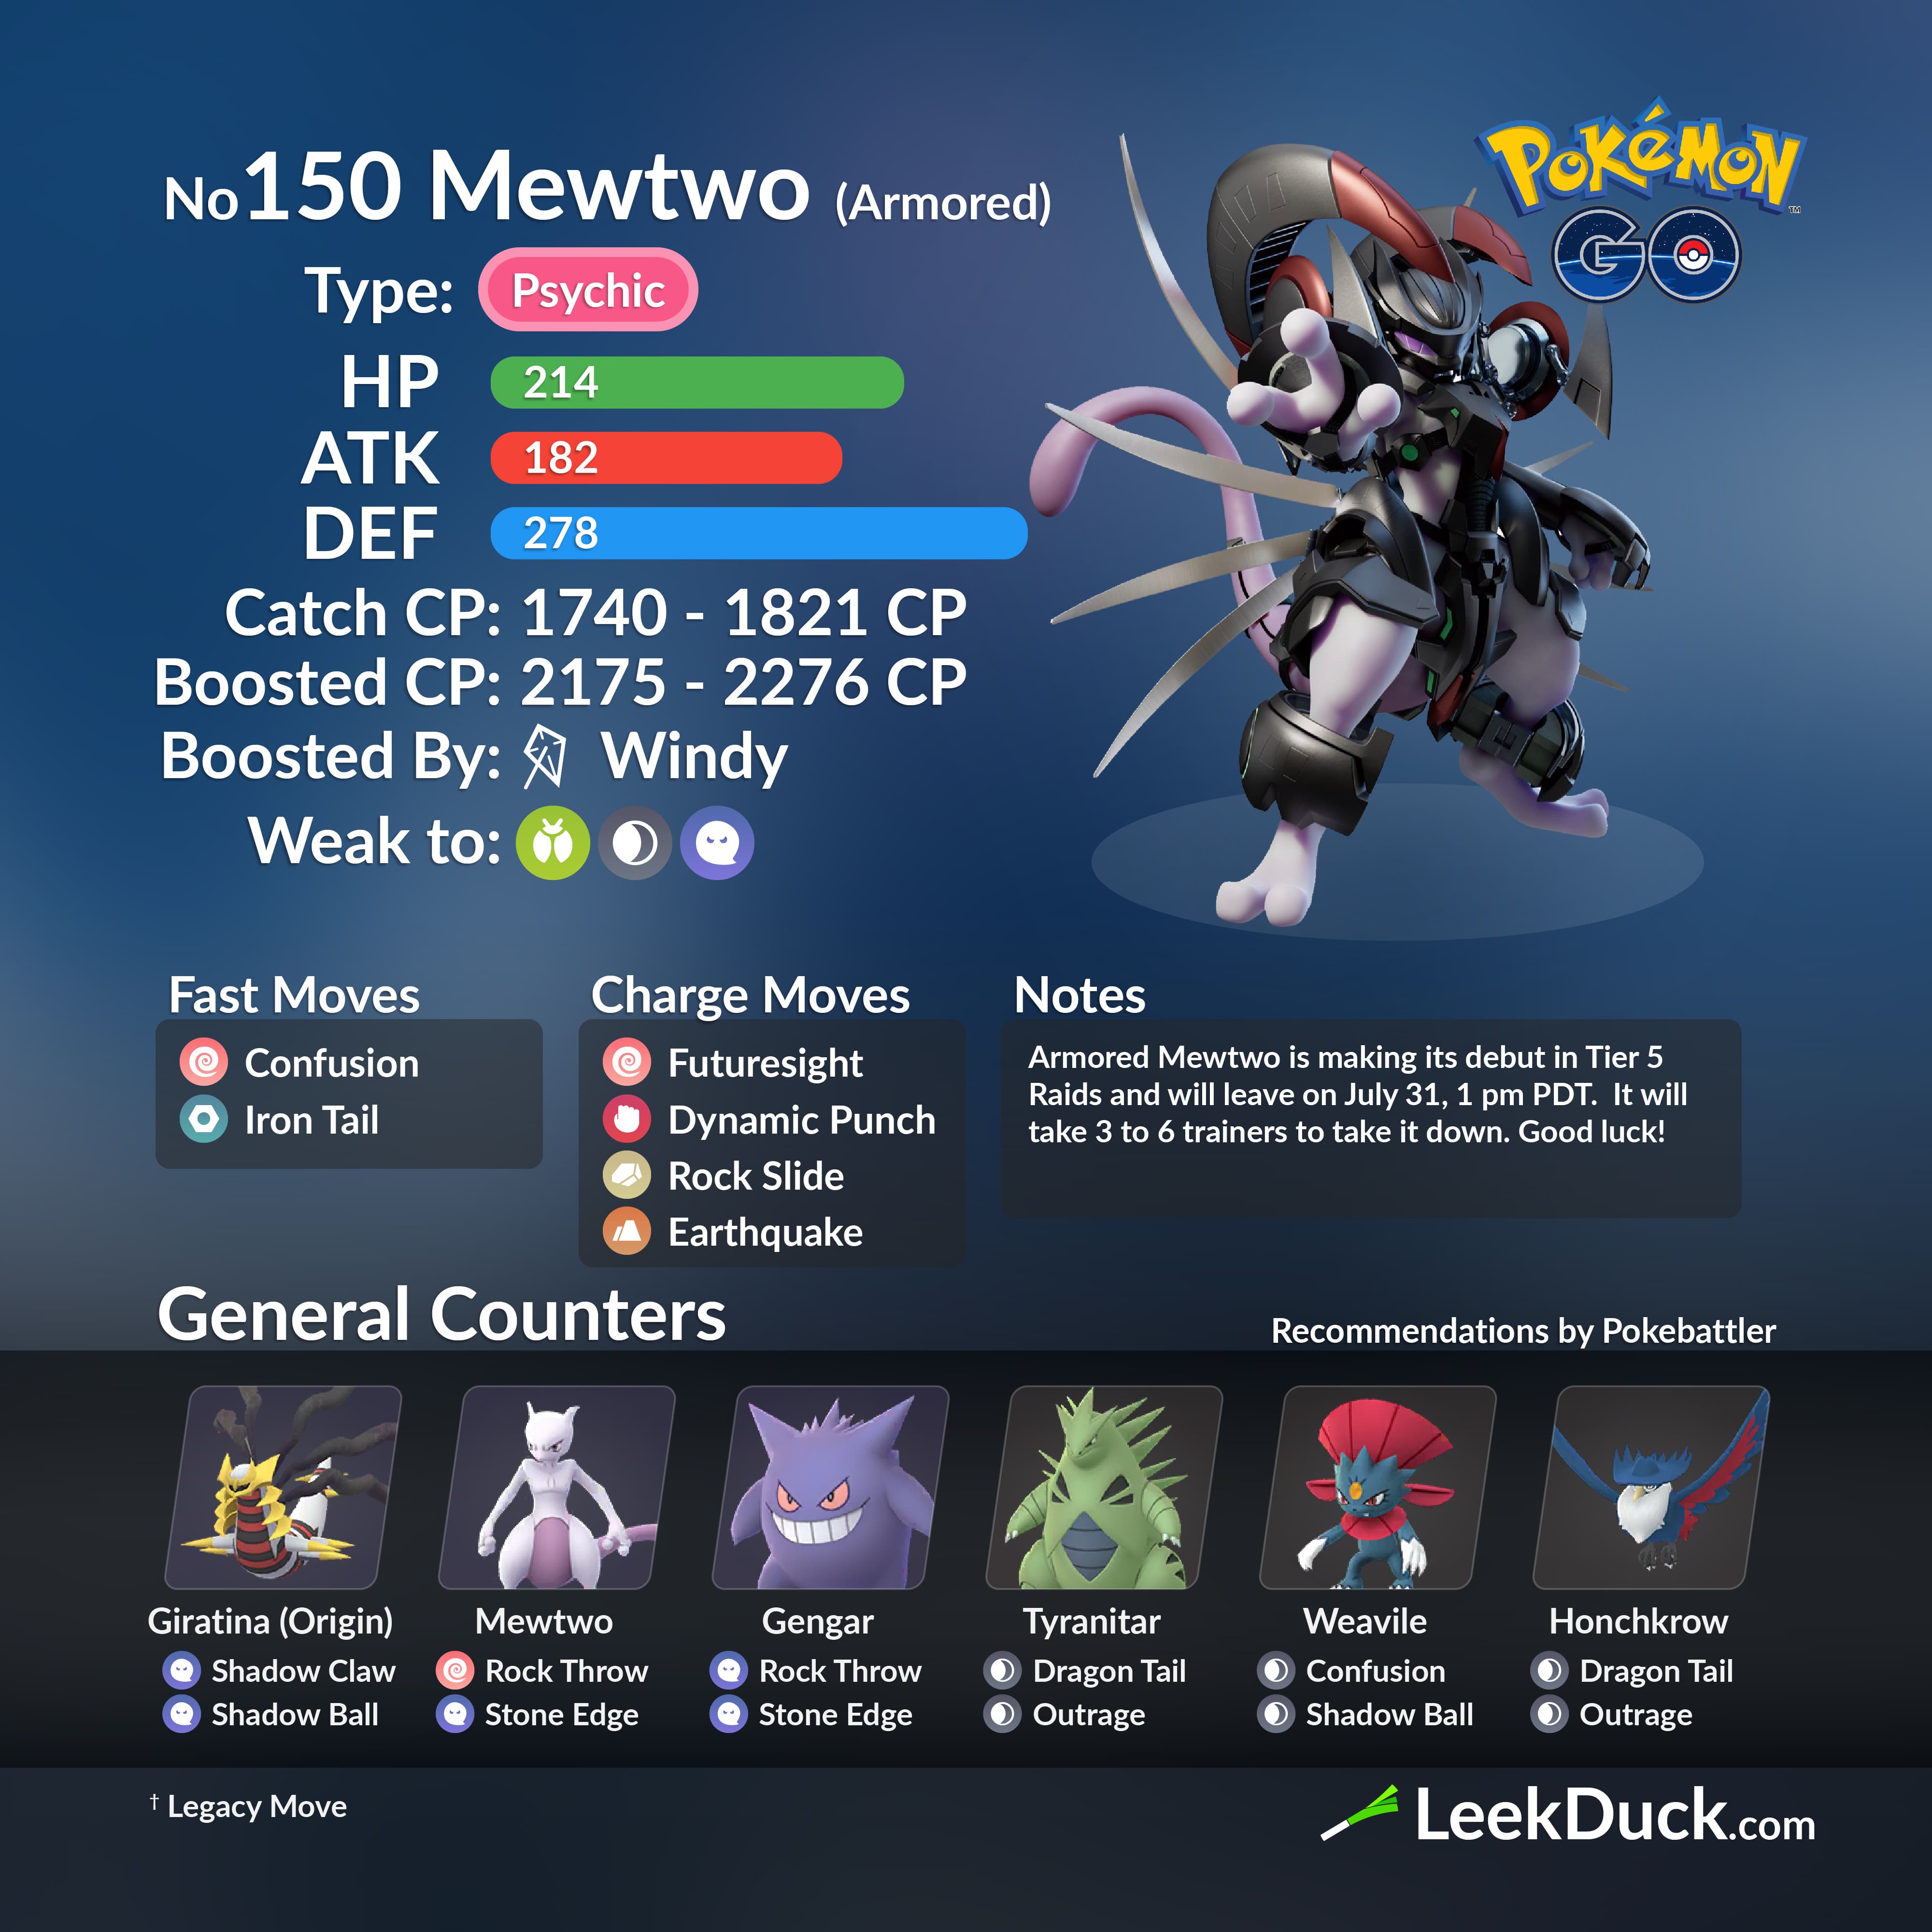 Leek Duck - Armored Mewtwo is coming to Pokémon GO. 